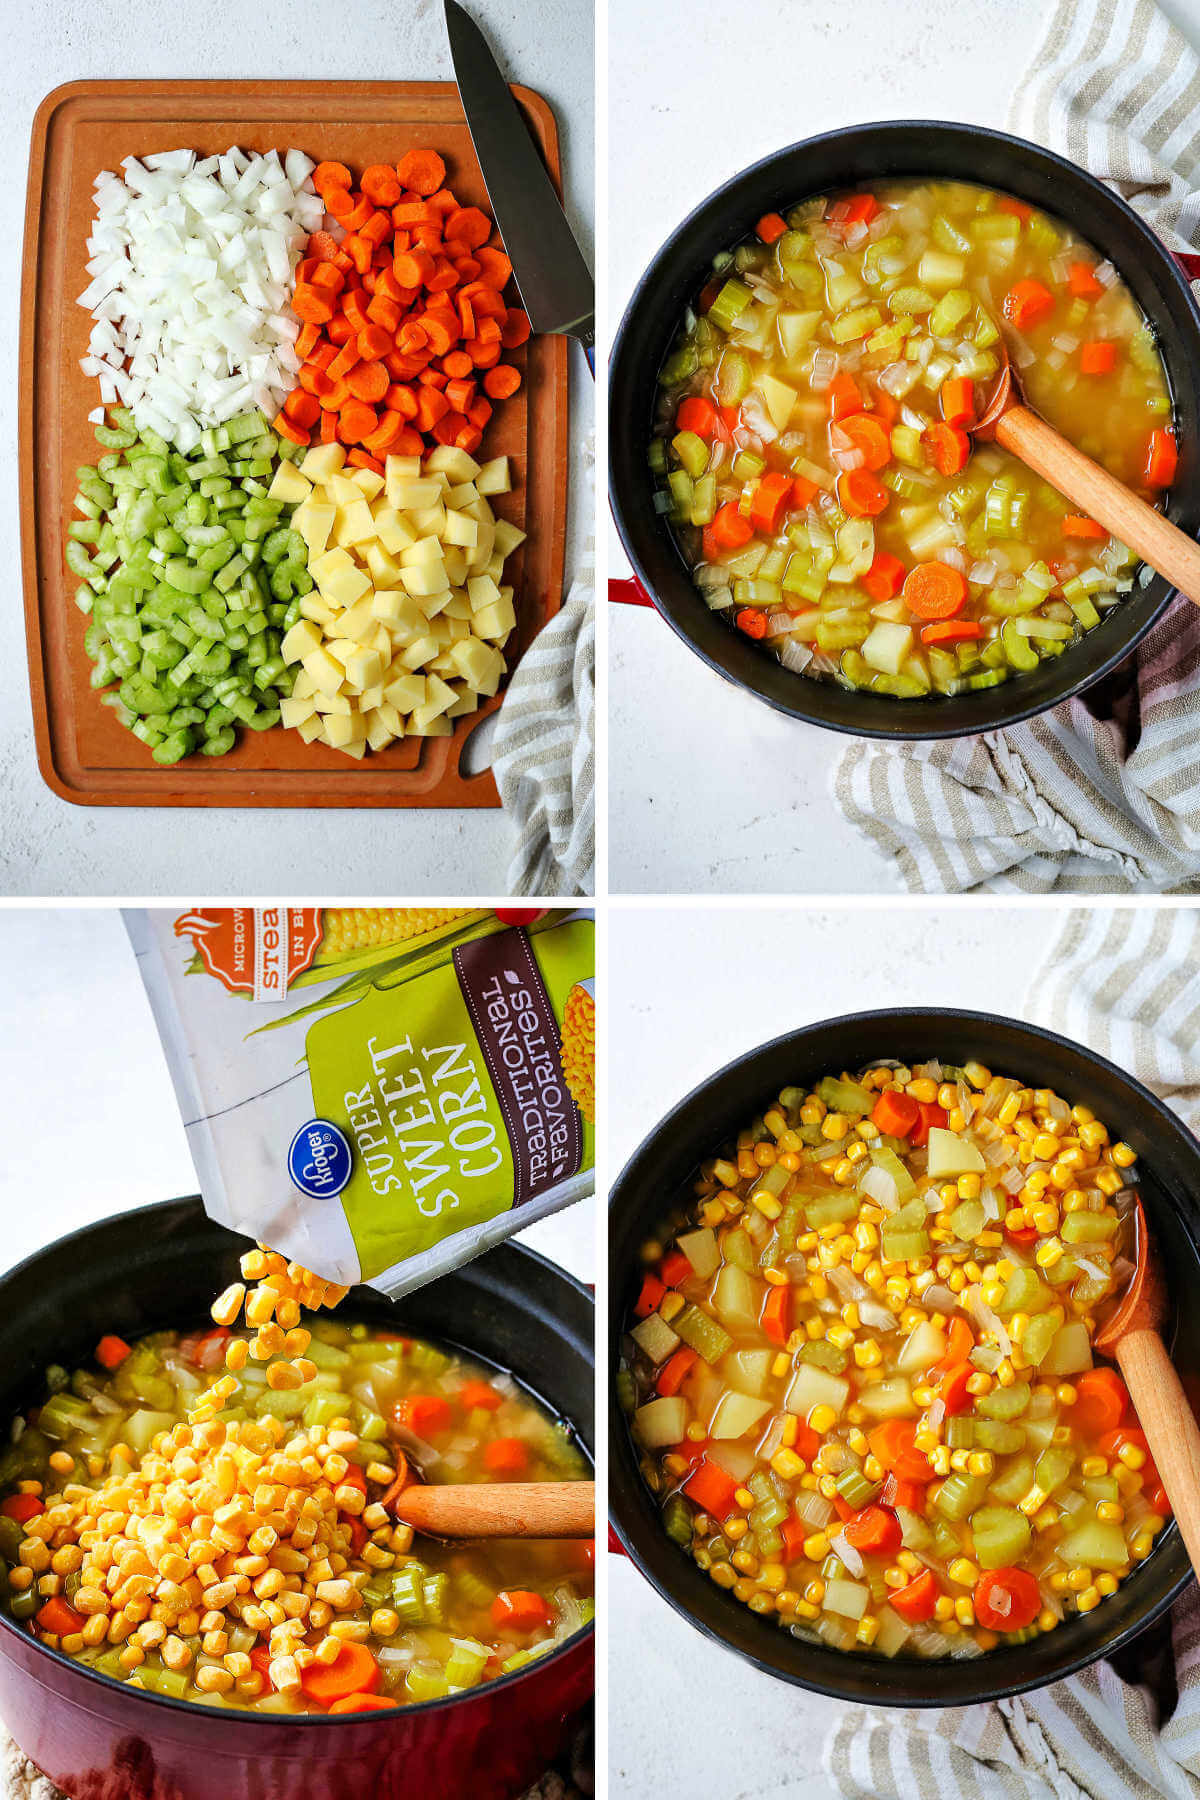 chopped veggies on a cutting board; vegetables in broth in a Dutch oven.